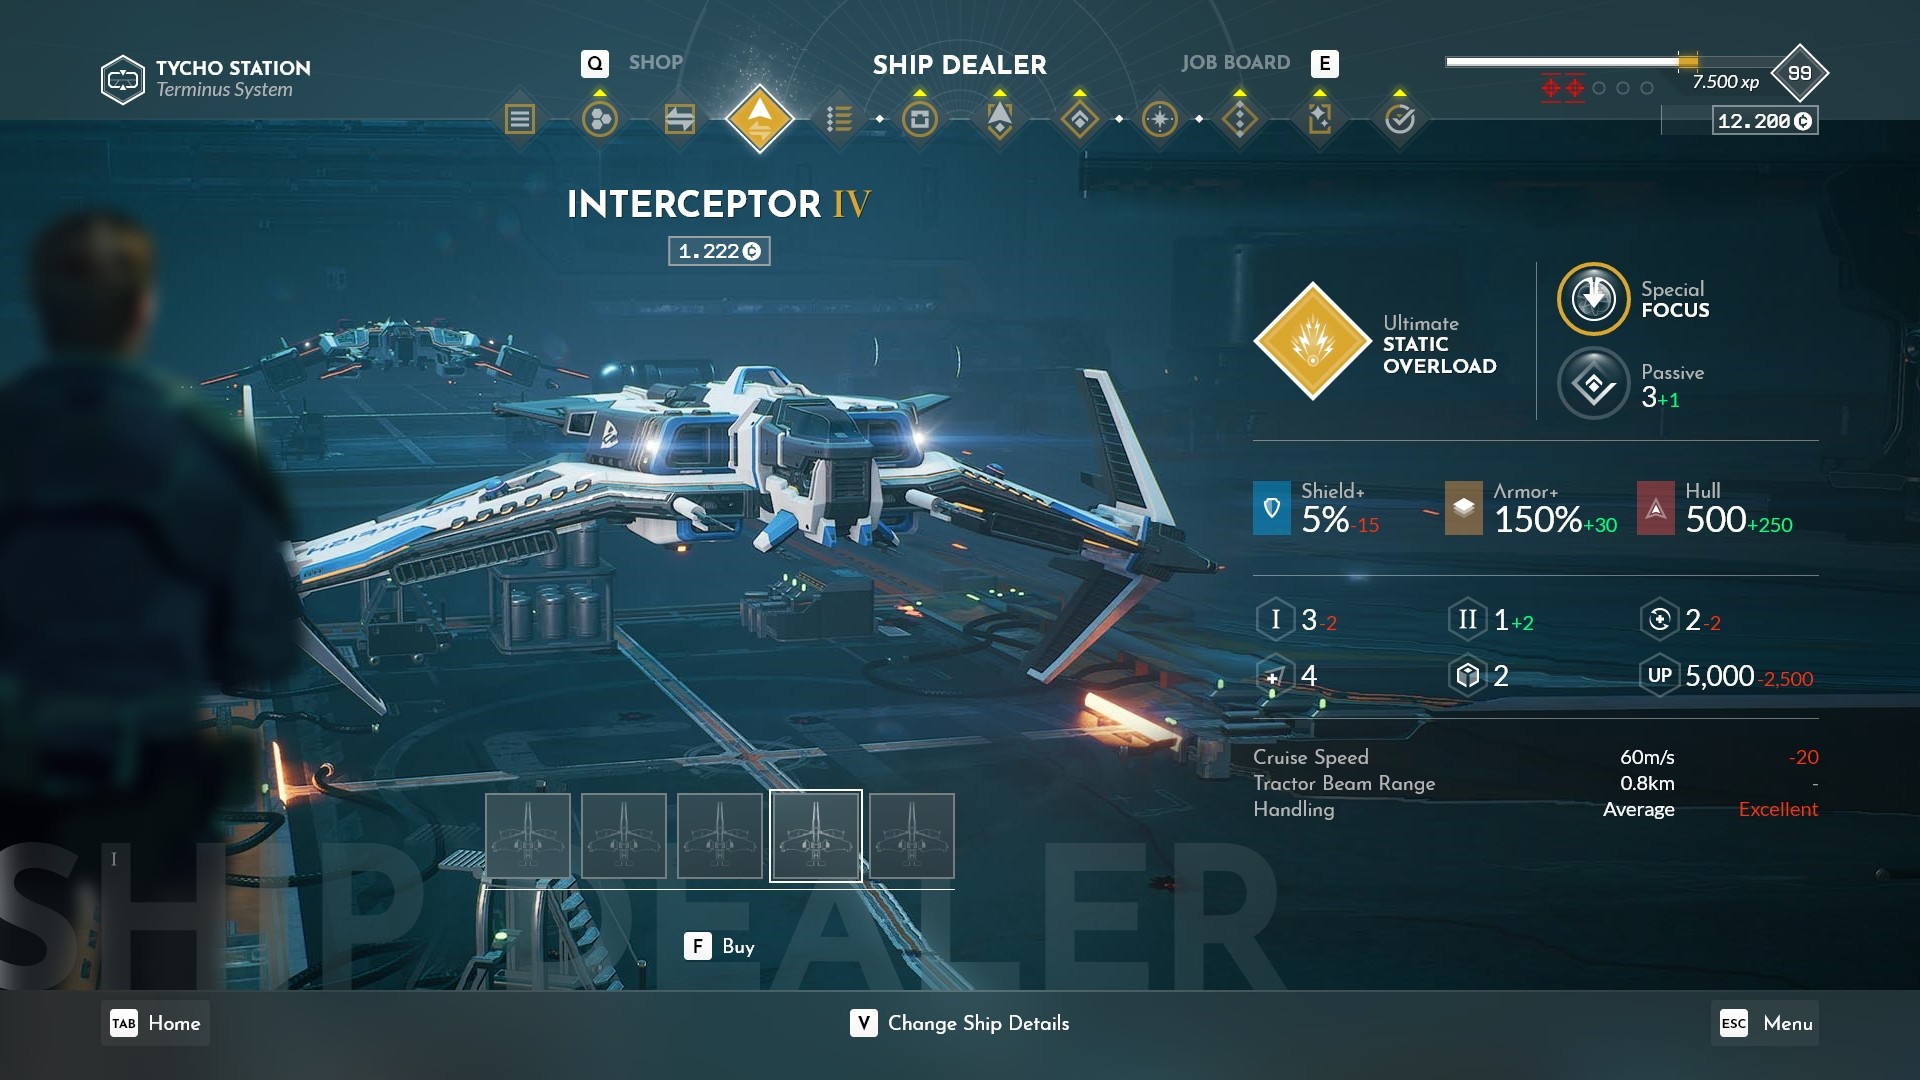 everspace 2 initial release date